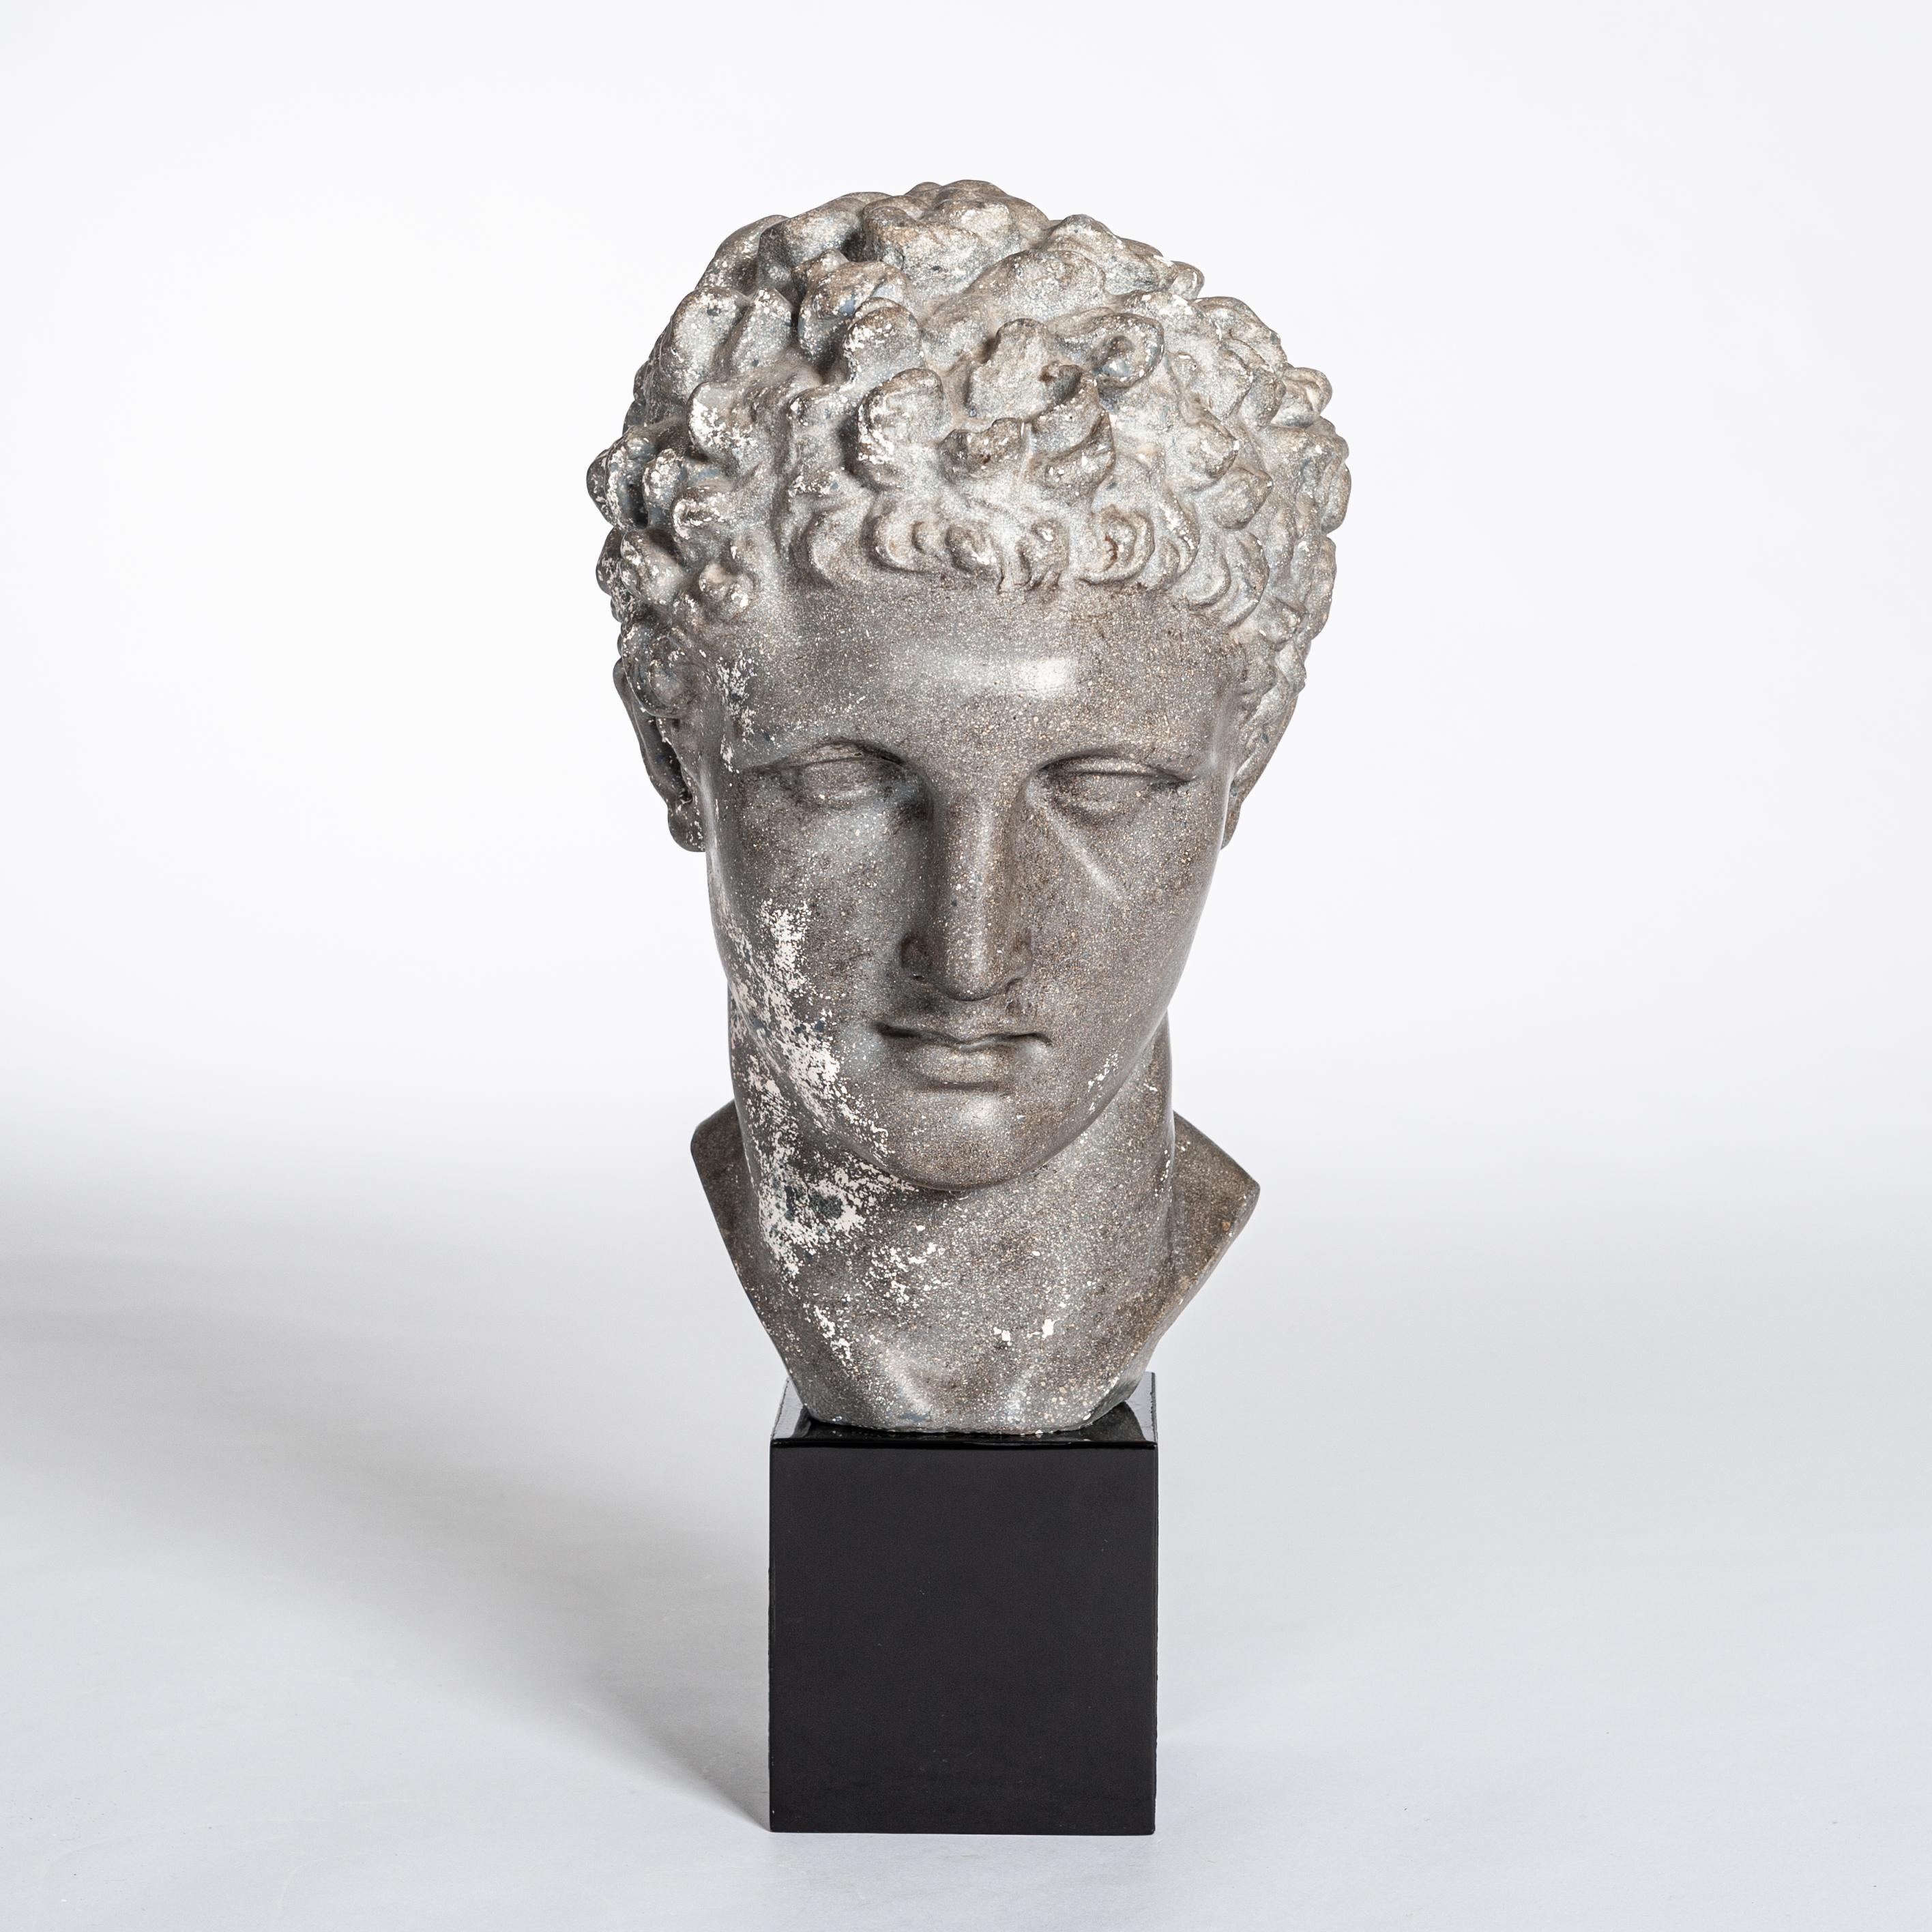 French Art Deco sculpture / bust of a classical head from antiquity 1930s.
Classical Greek scultpural representation made of plaster cast on lacquered wooden base.
Expressive object both in delicacy and reproduction of the heights and depths.